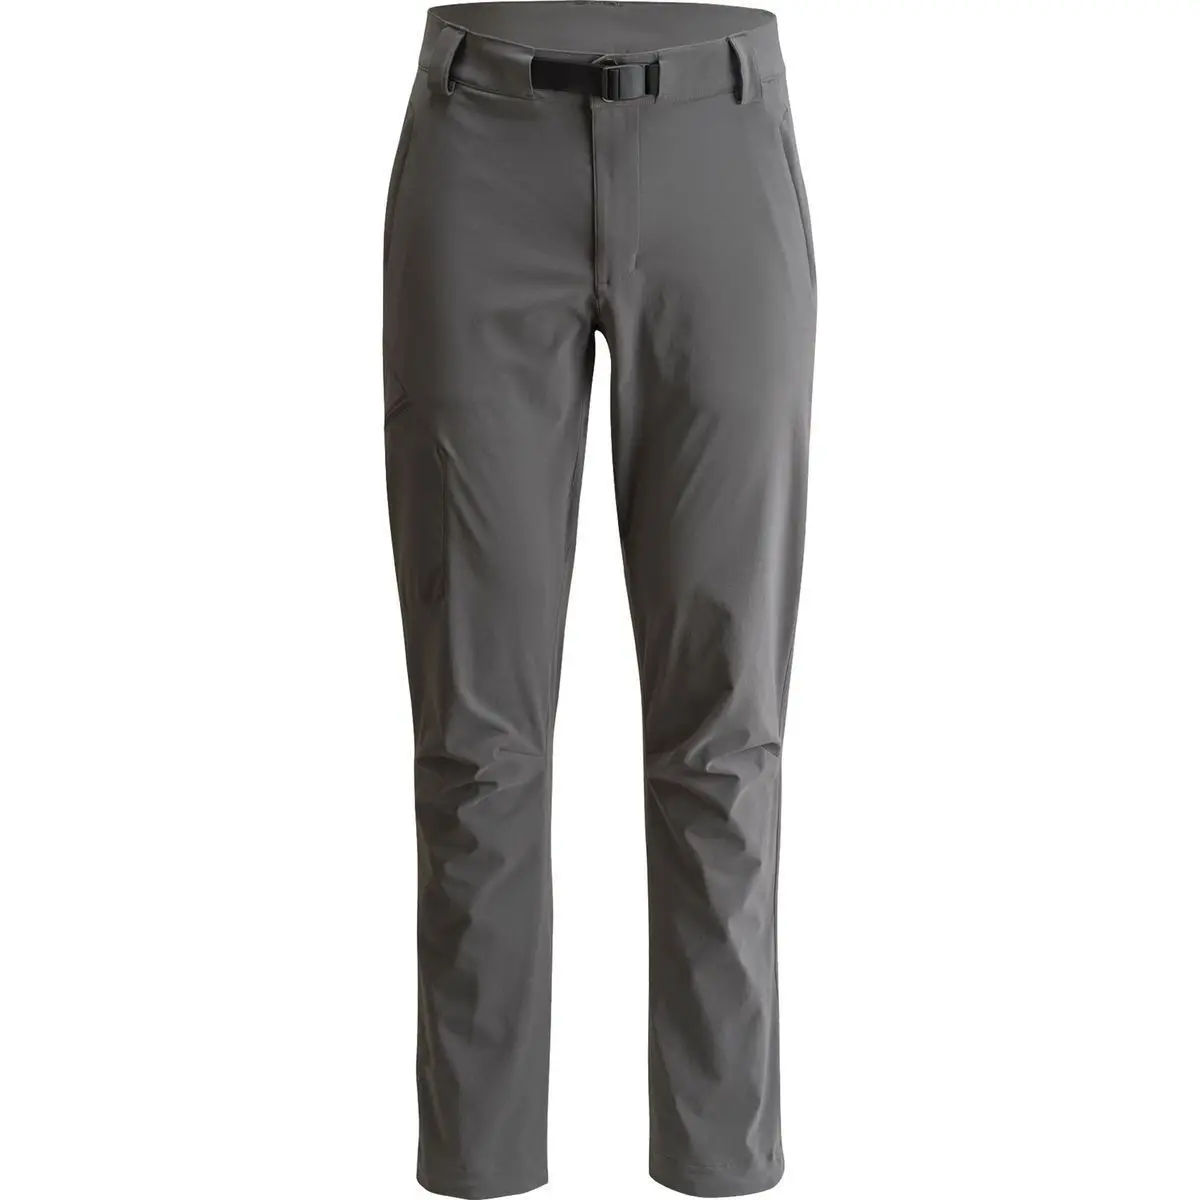 DWR Finish New Style Outdoor Pants Hiking High Quality Sports Trousers for Men